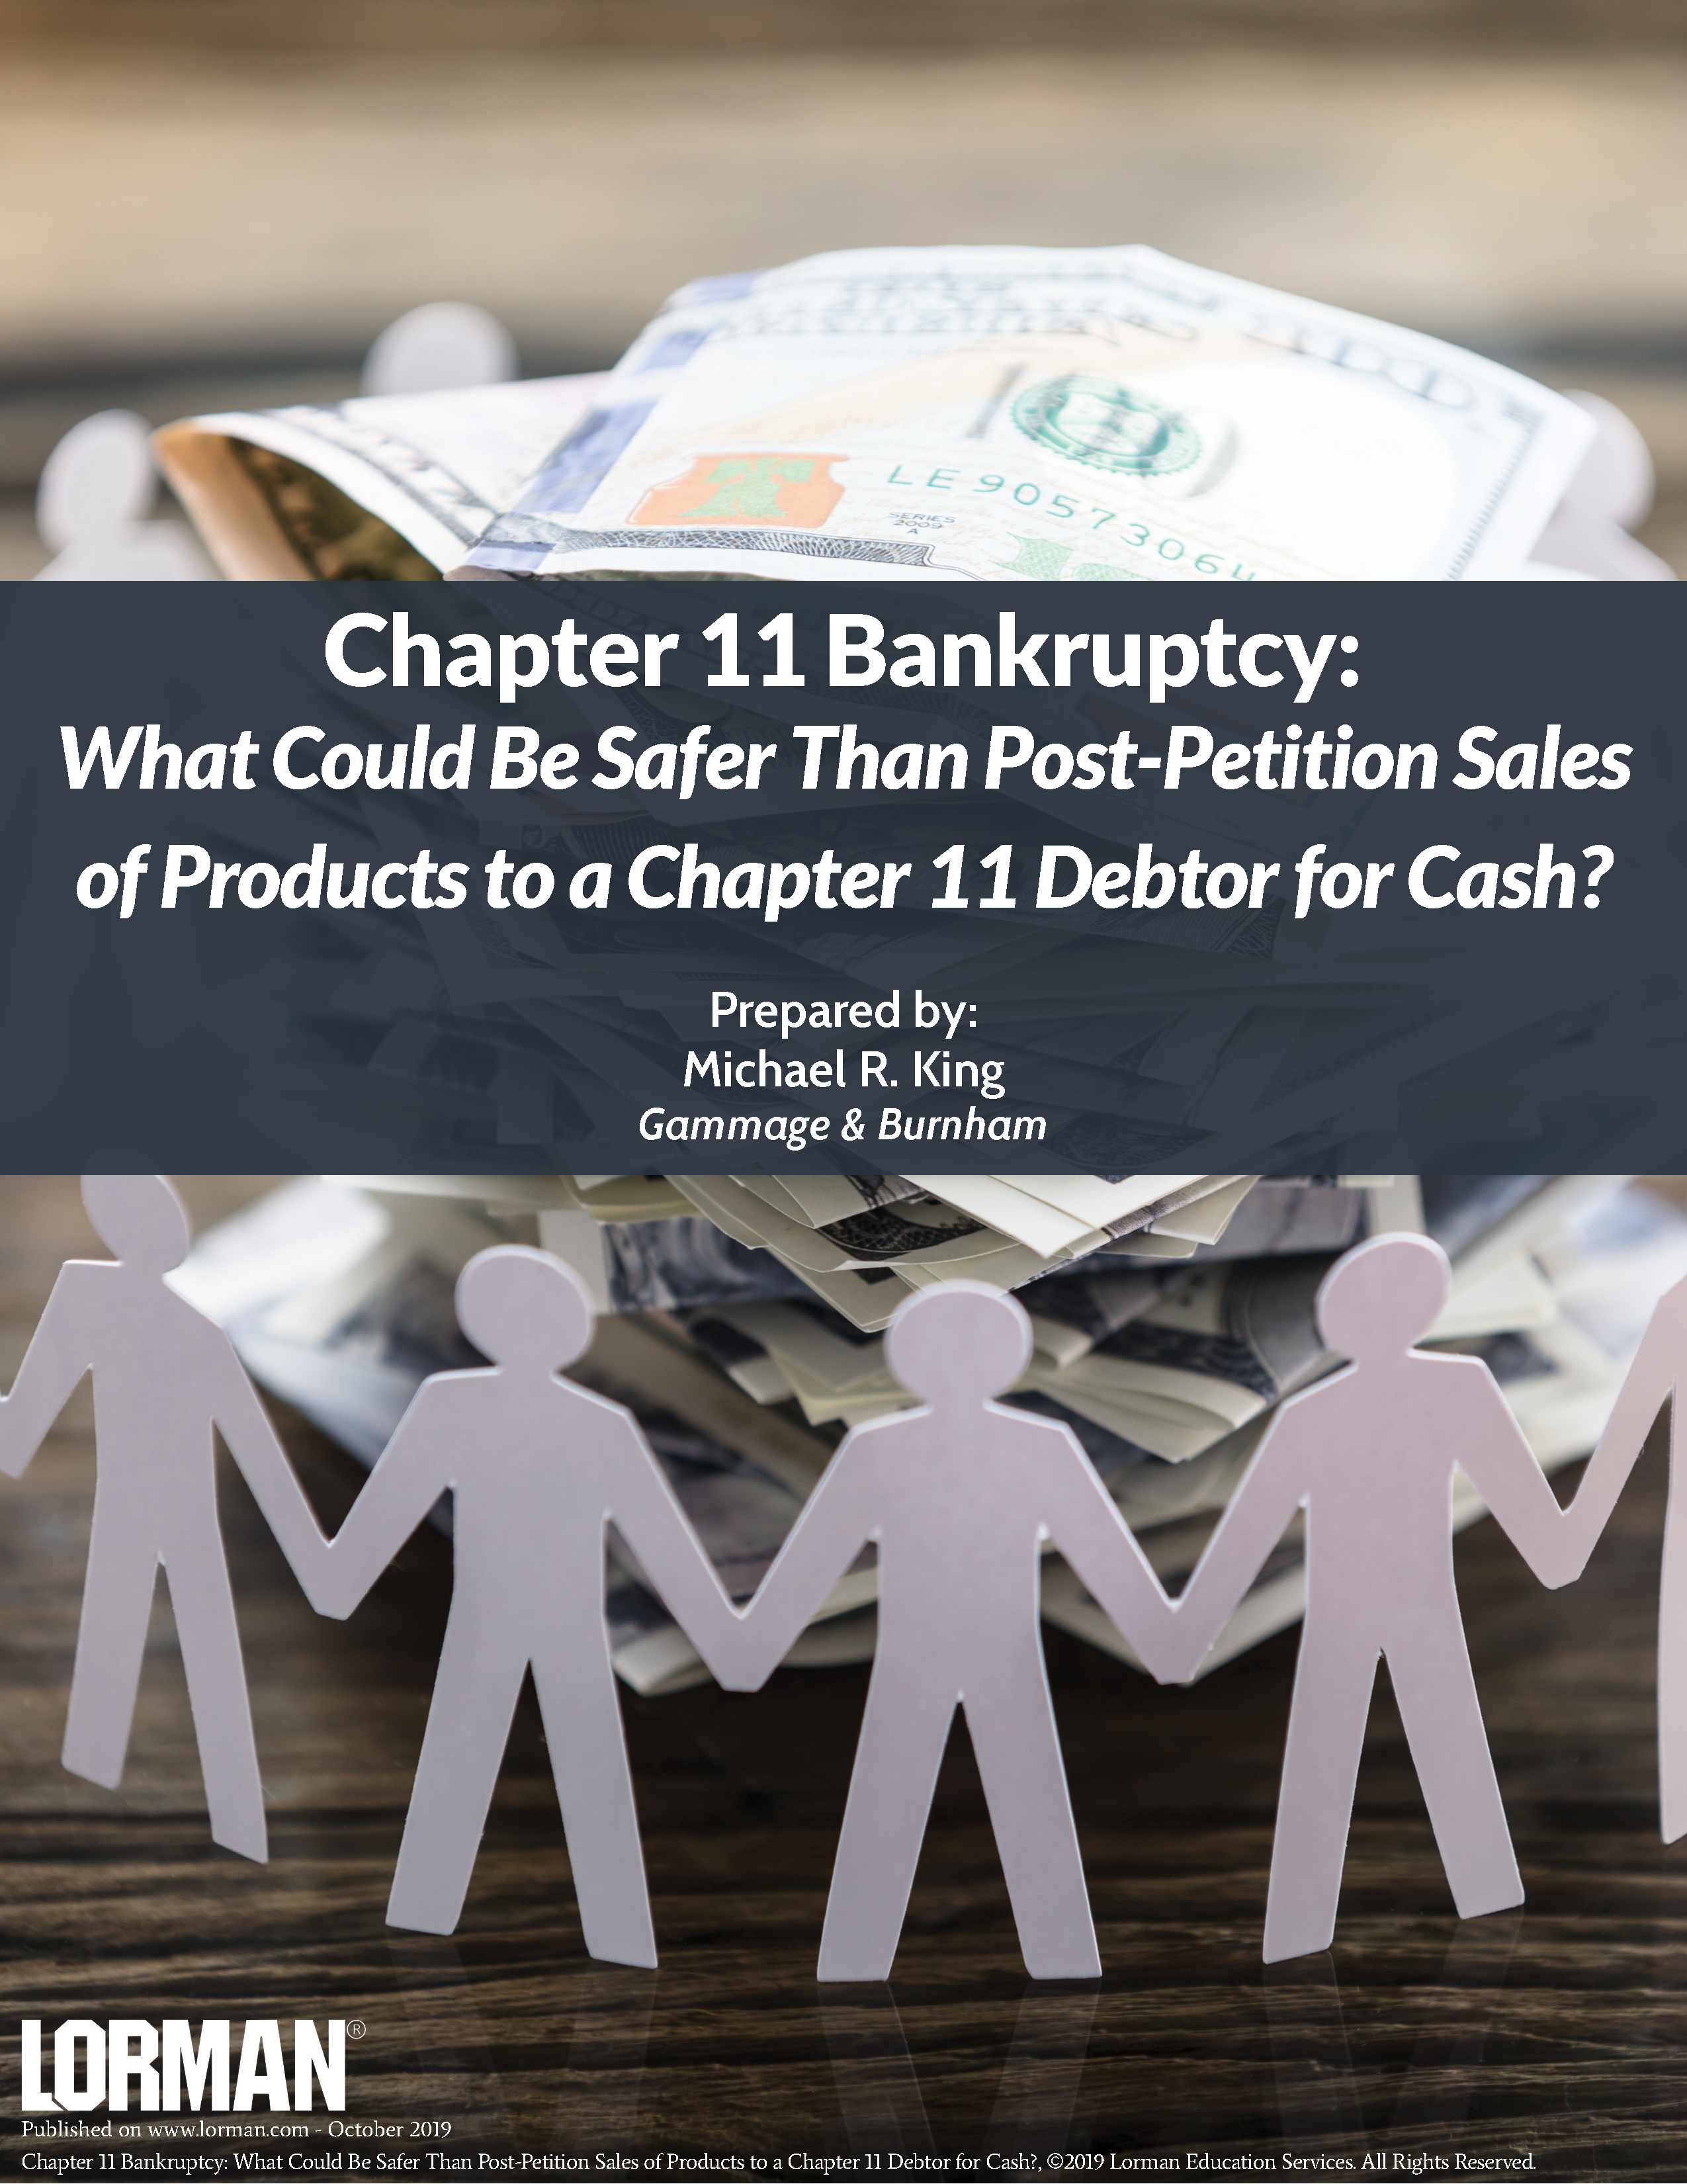 Chapter 11 Bankruptcy: What Could Be Safer Than Post-Petition Sales of Products to a Debtor for Cash